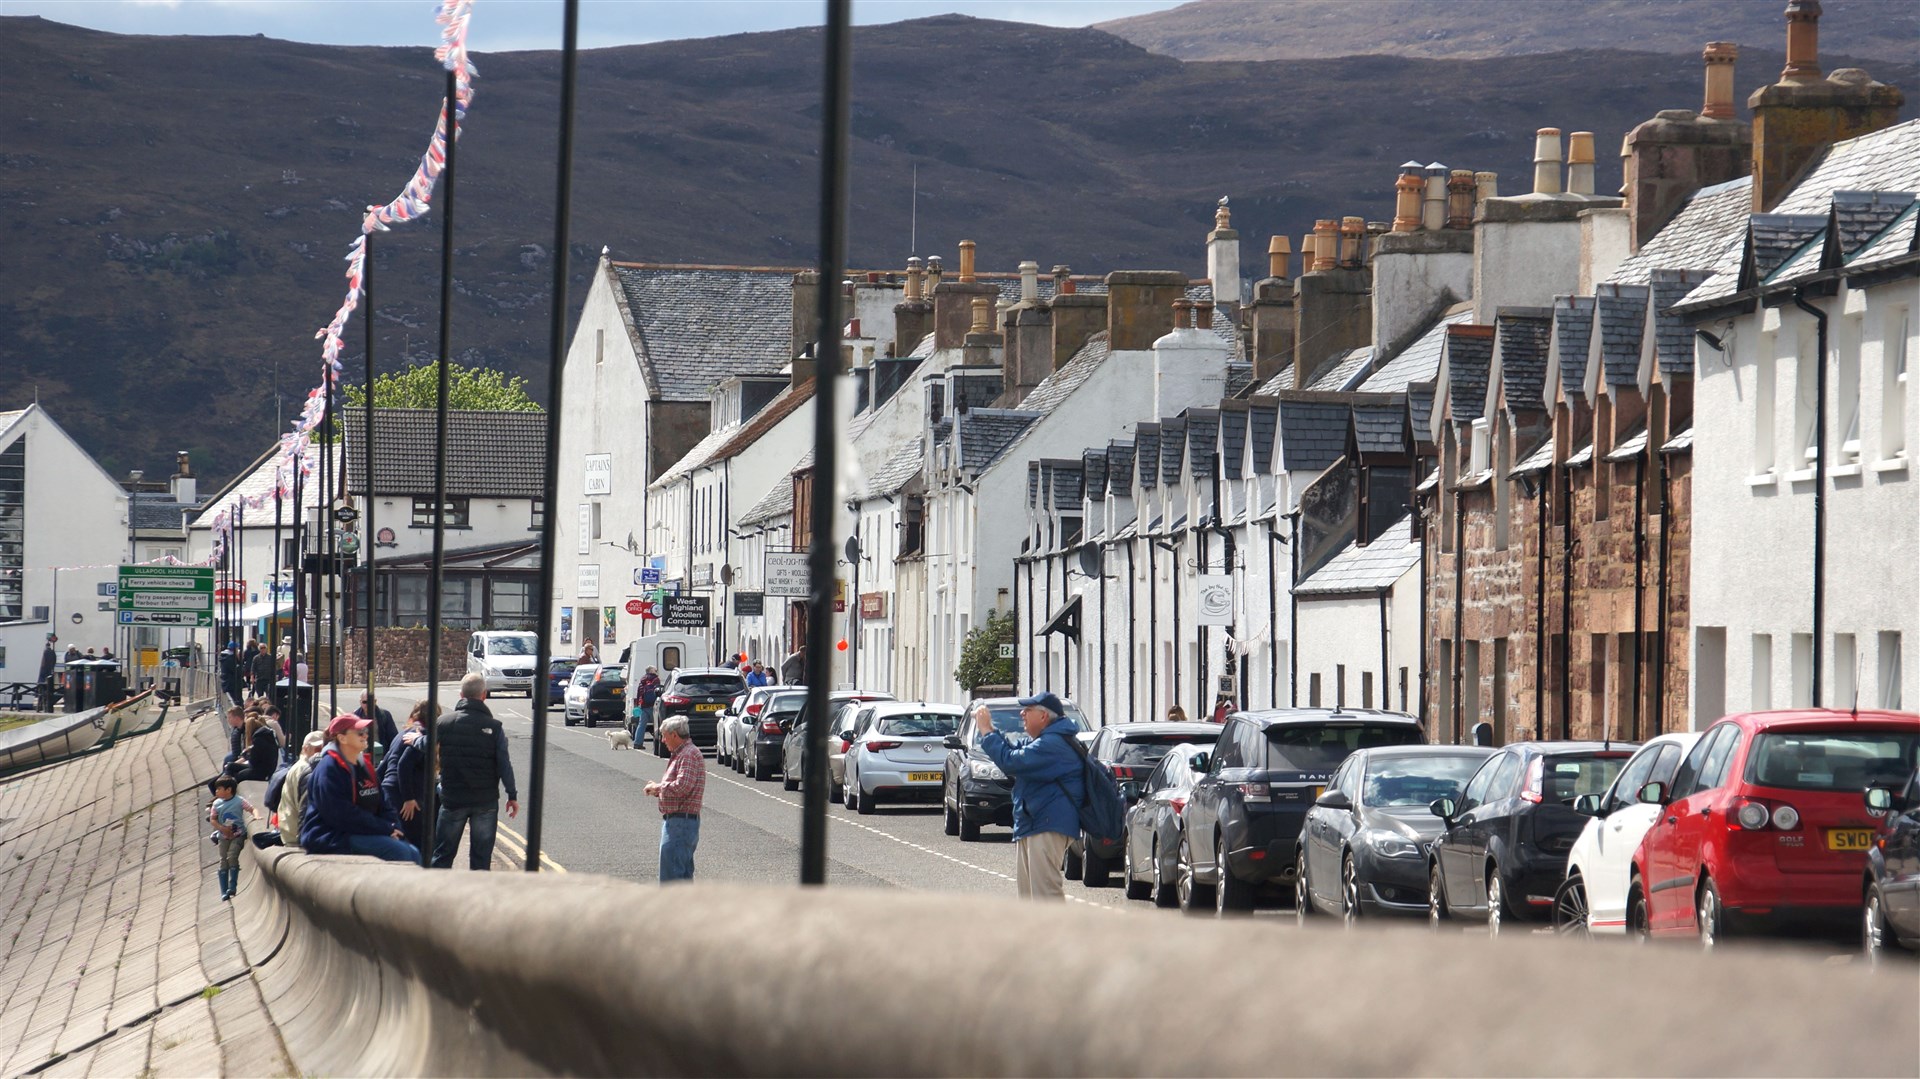 Shore Street in Ullapool would be transformed under the plans.